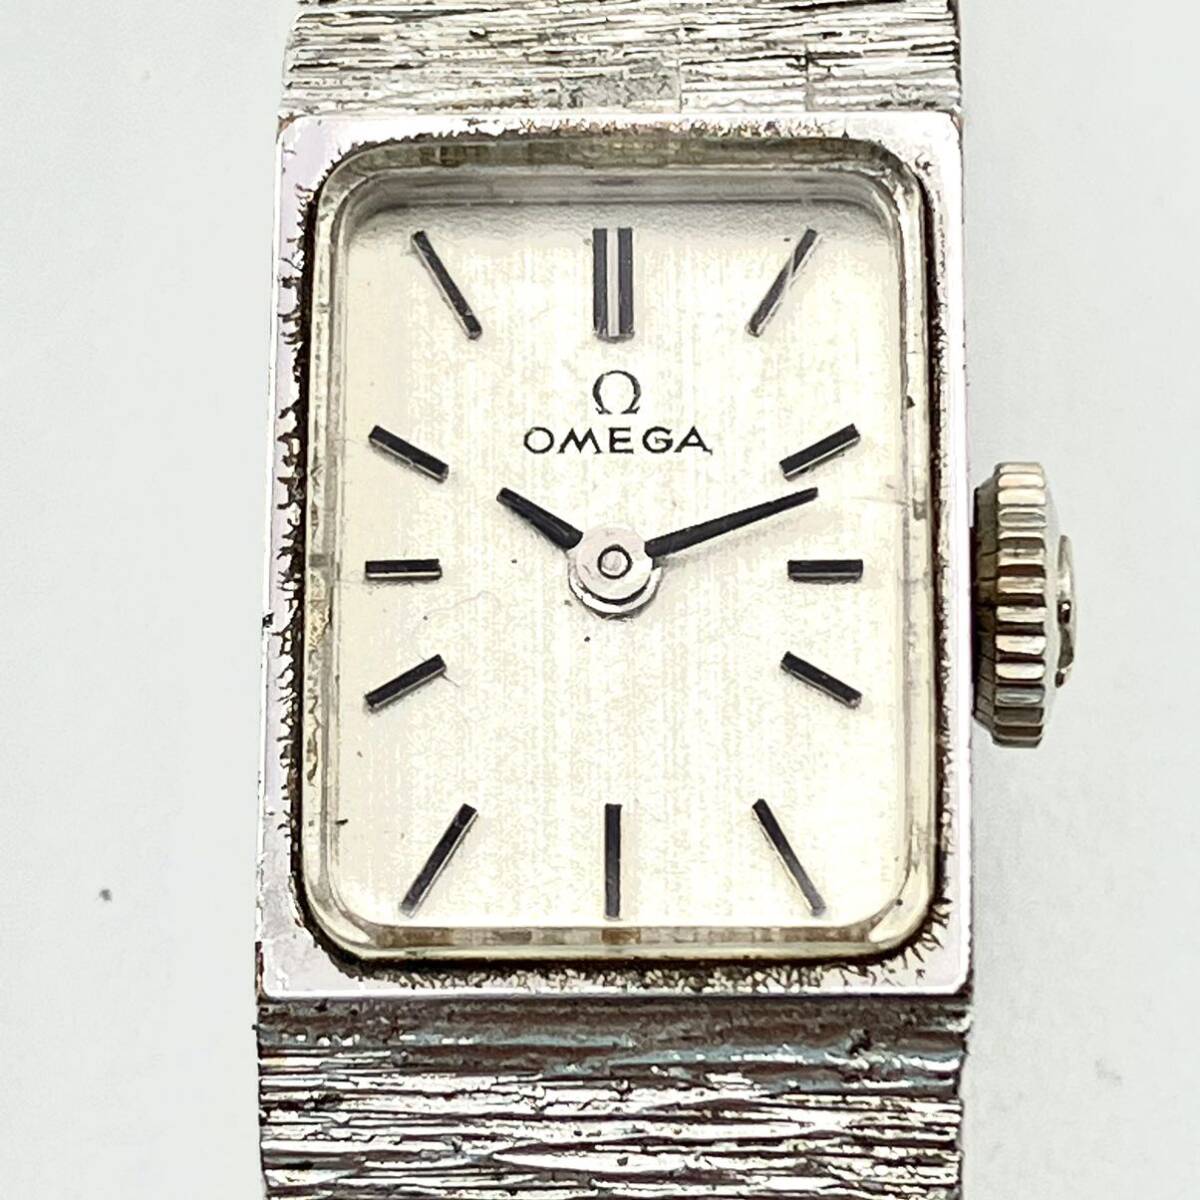 OMEGA Omega square hand winding present condition goods 